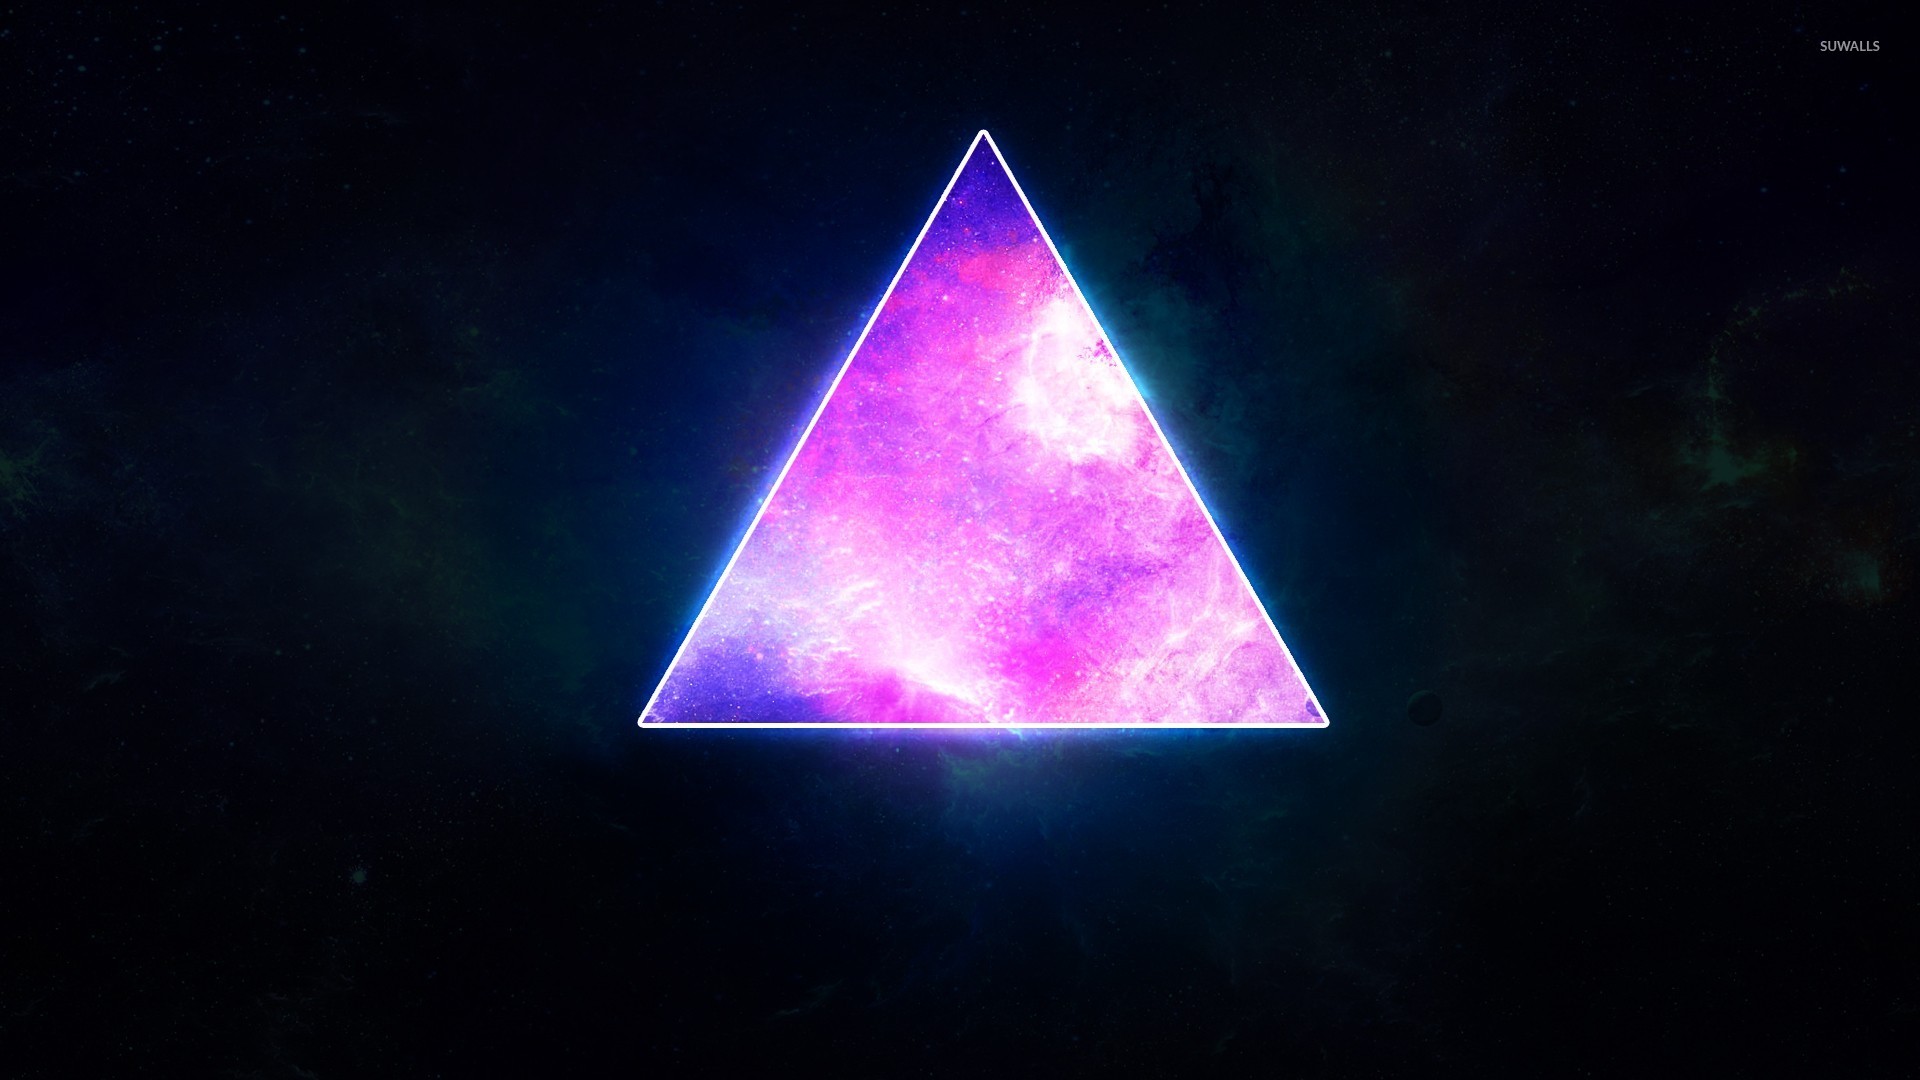 Cosmic Triangle Wallpaper Abstract Wallpapers 26752 HD Wallpapers Download Free Images Wallpaper [wallpaper981.blogspot.com]